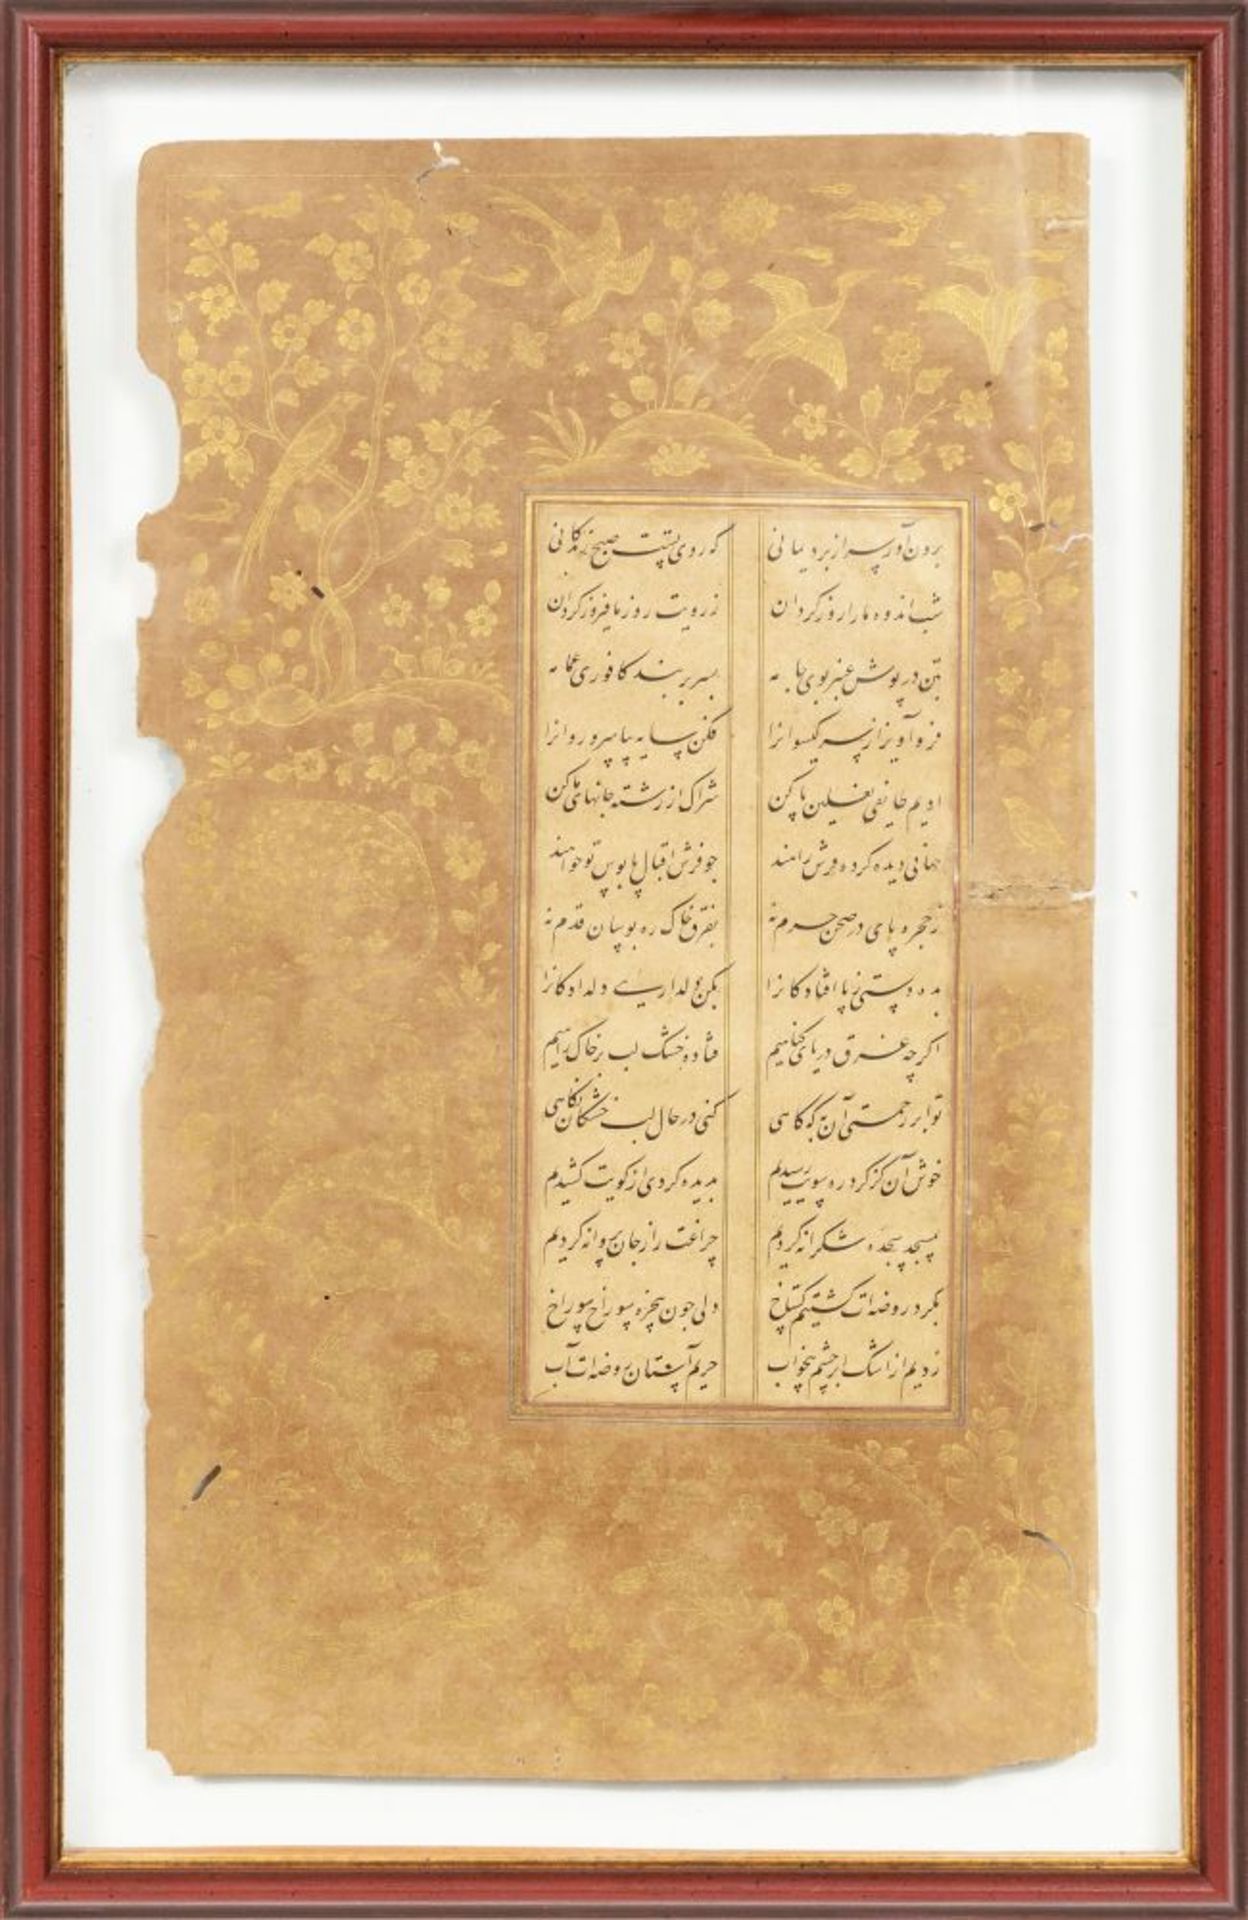 Border Drawings and Page from a Manuscript of 'Yusuf and Zulaykha' by Jami.